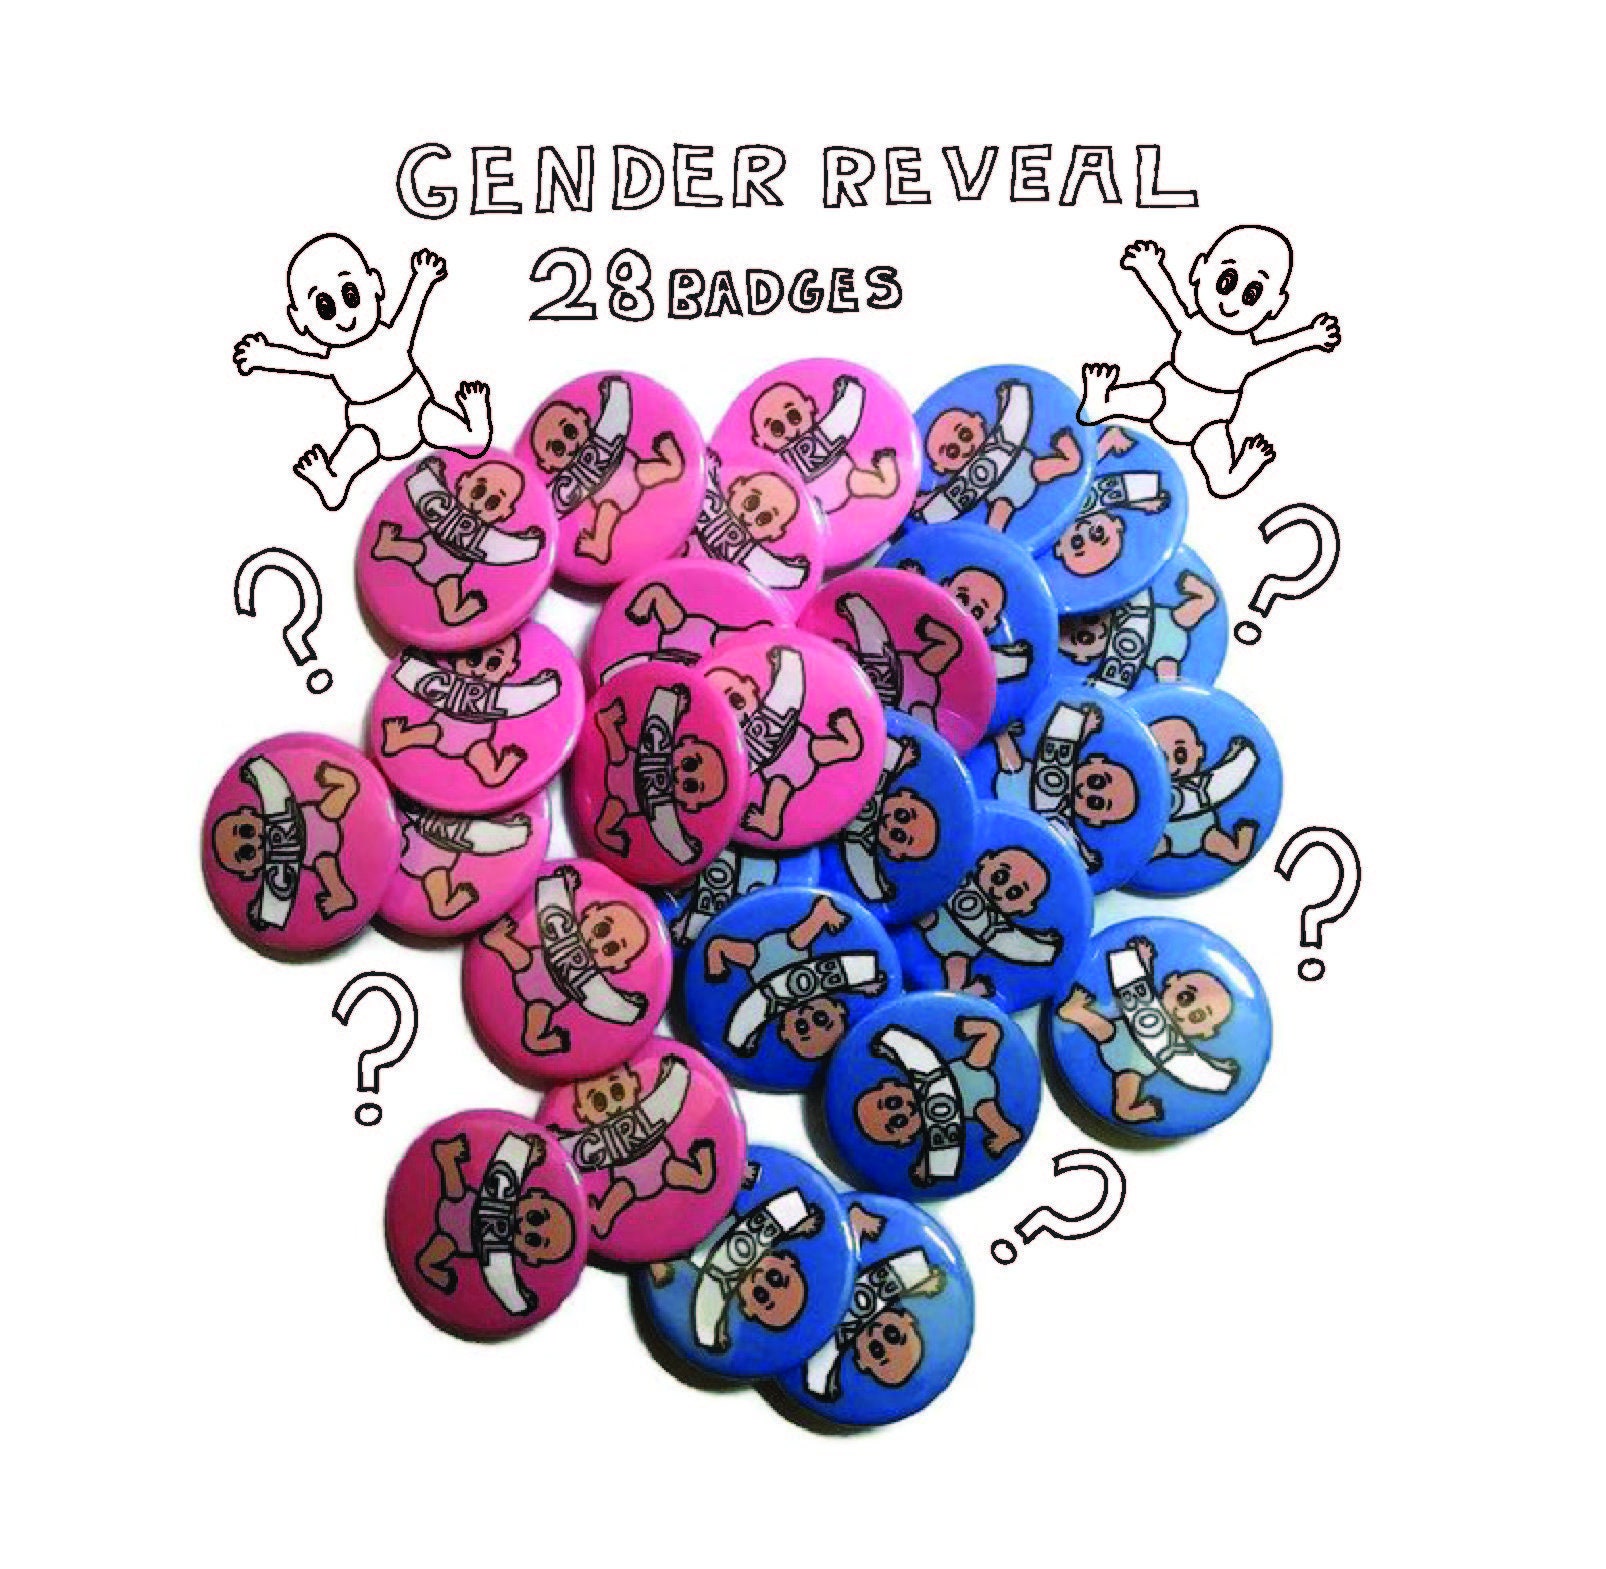 gender reveal party badges set of 28 baby shower new baby gathering